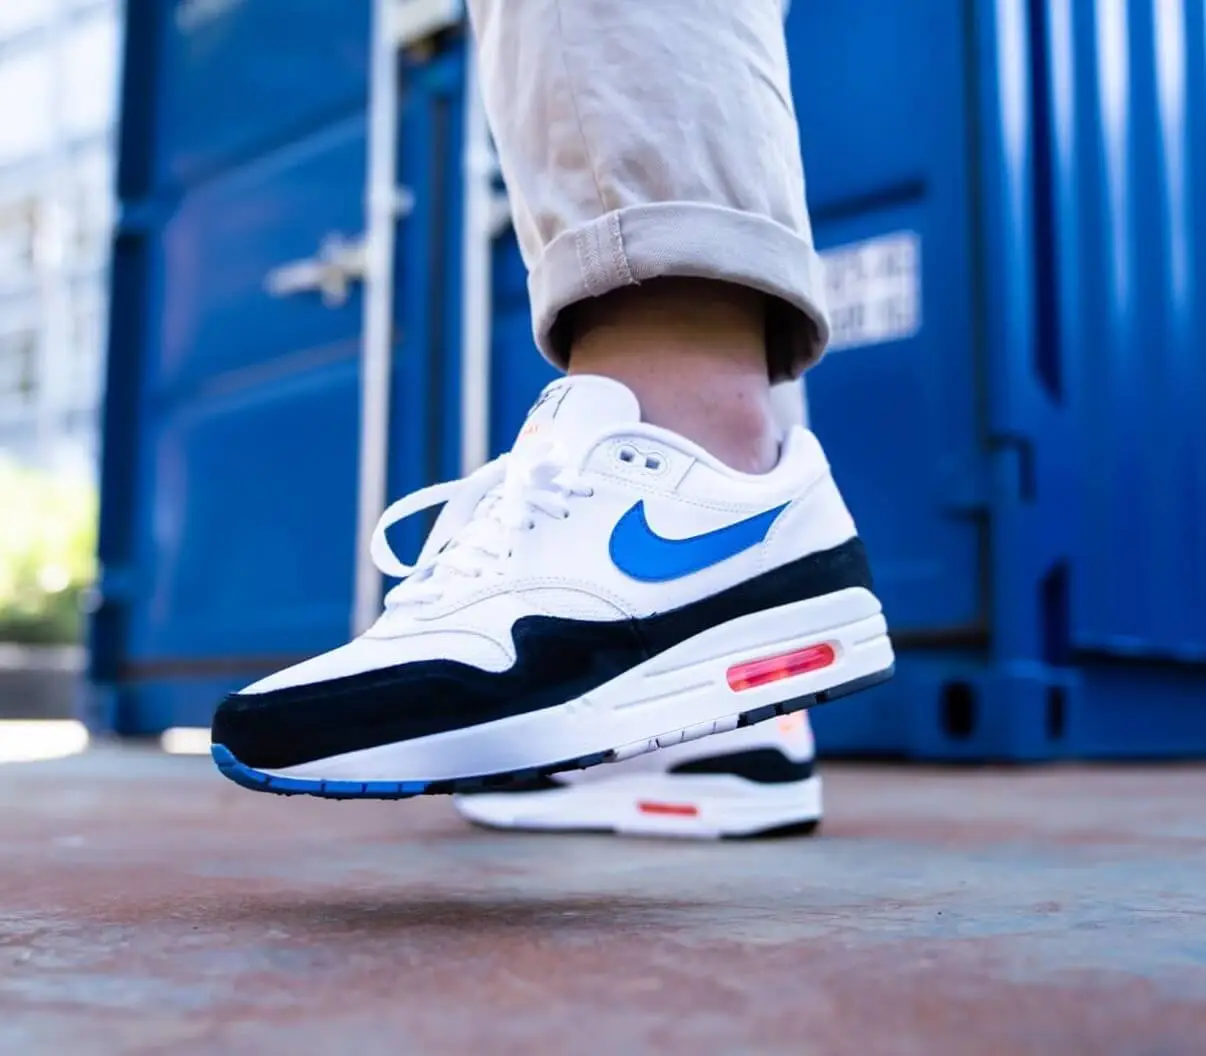 Foot Locker Just Launched The Nike Air Max 1 Photo Blue | The Sole Supplier